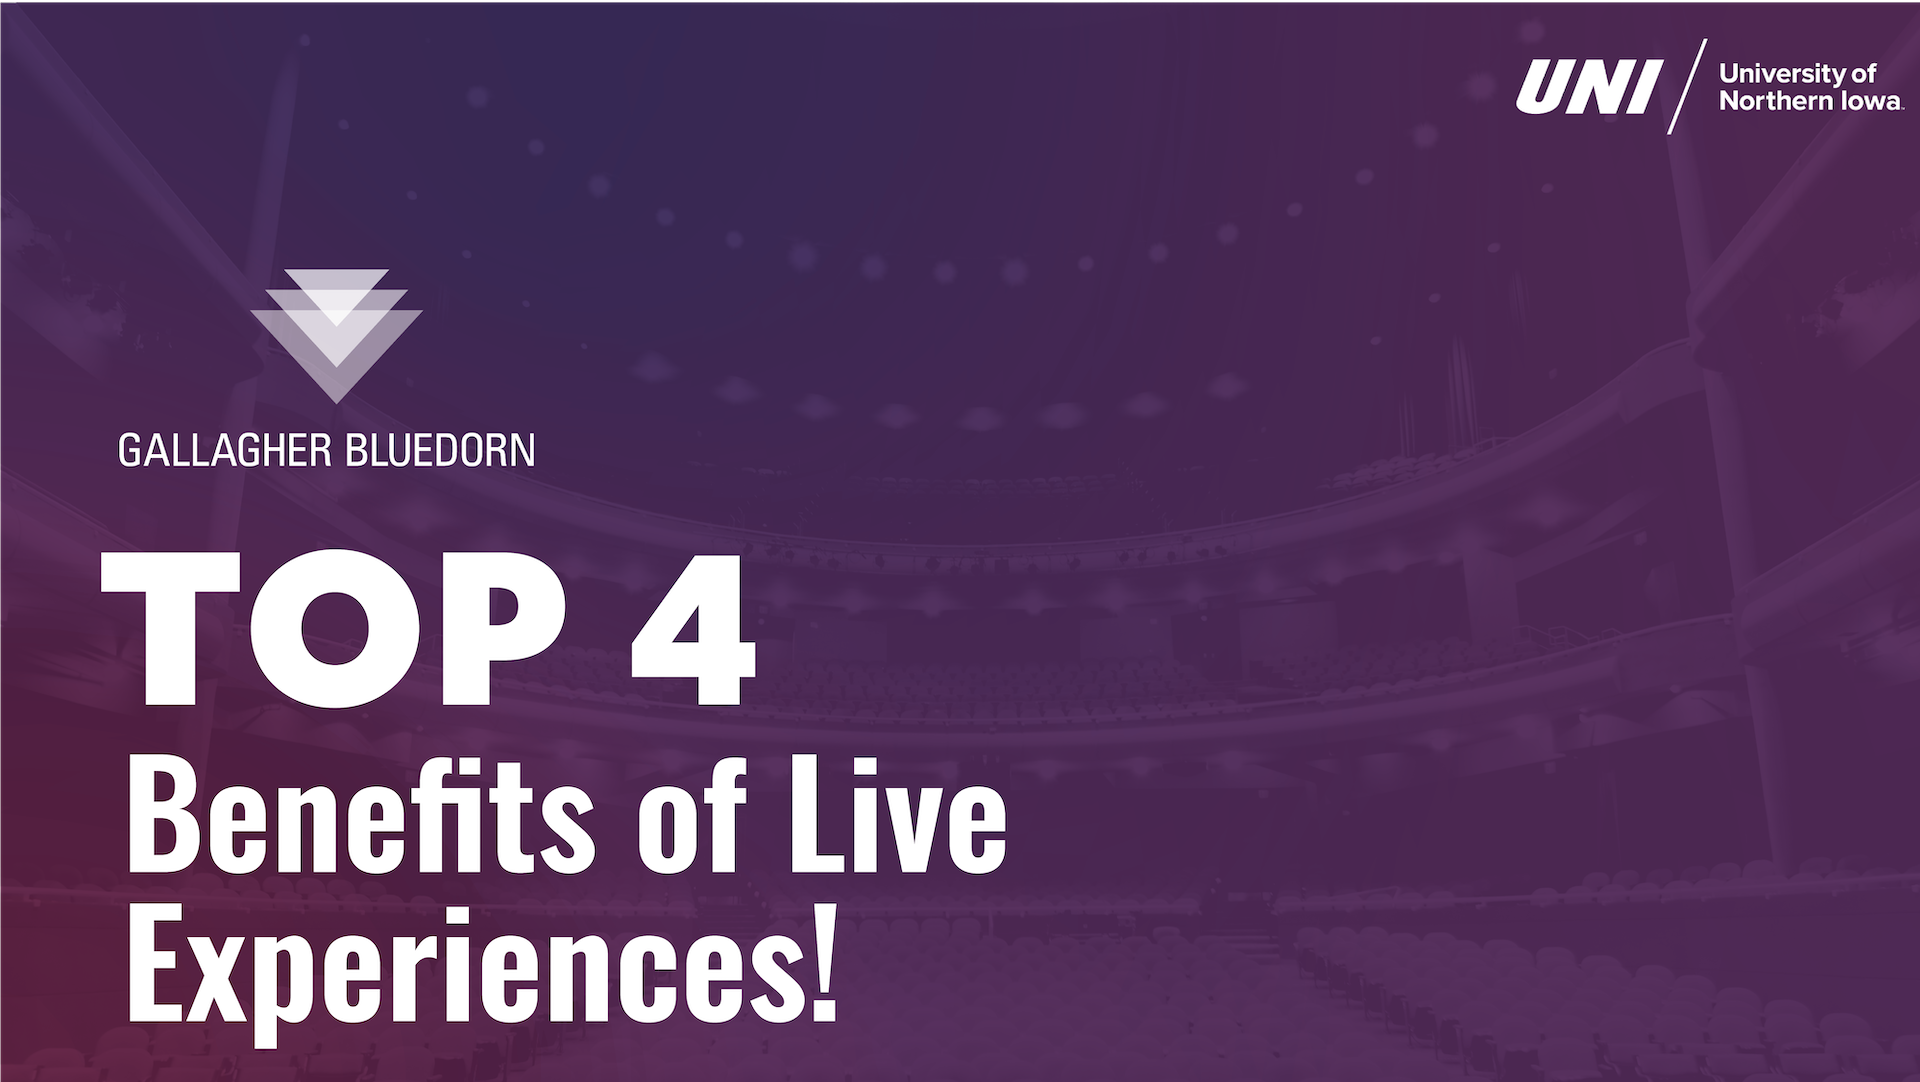 Top 4 Benefits of Live Experiences